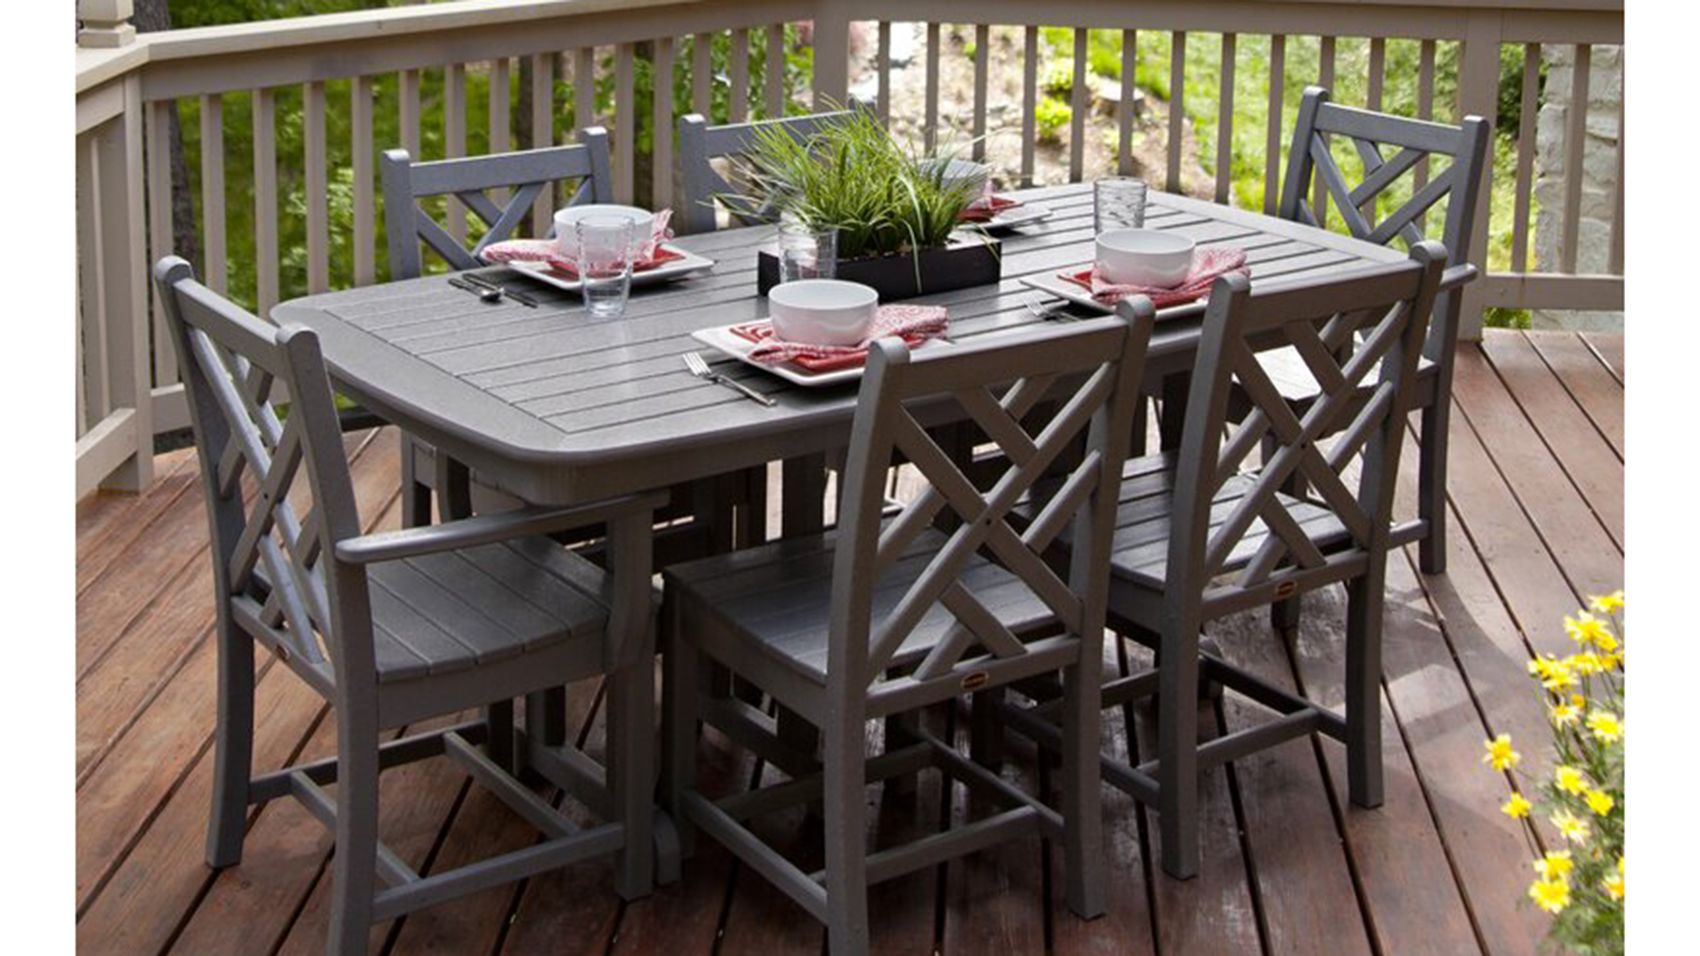 Outdoor Patio Furniture That S Worth, Wayfair Outdoor Table And Chairs With Umbrella